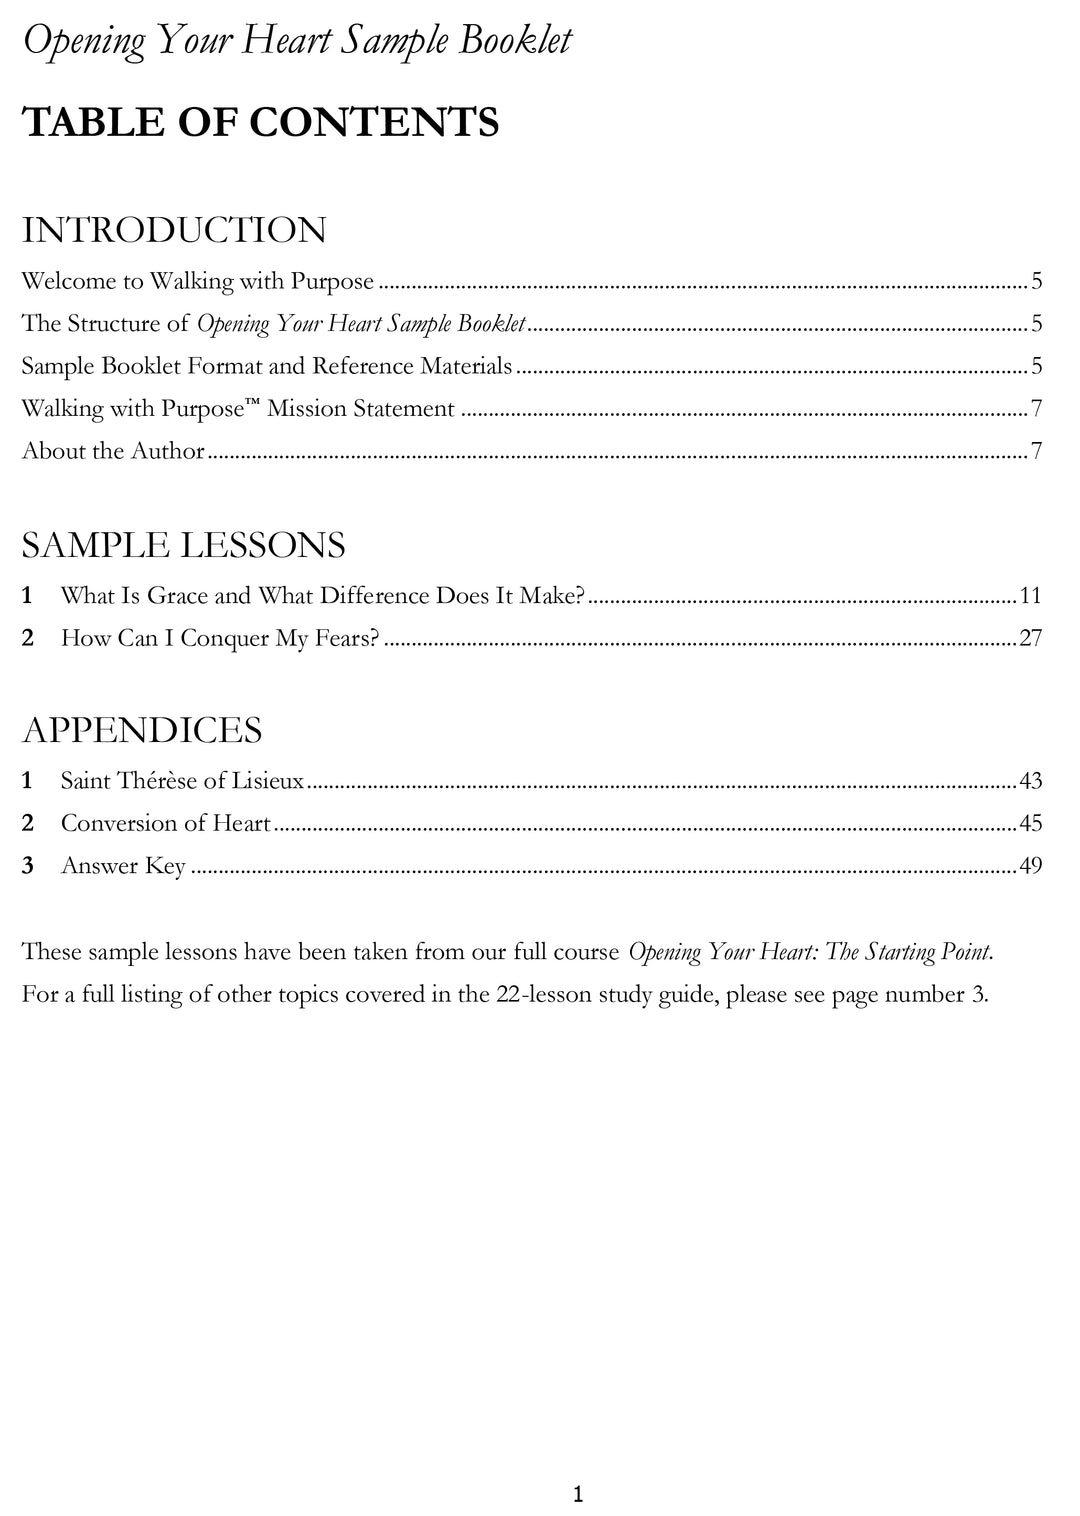 Opening Your Heart Sample e-Book table of contents